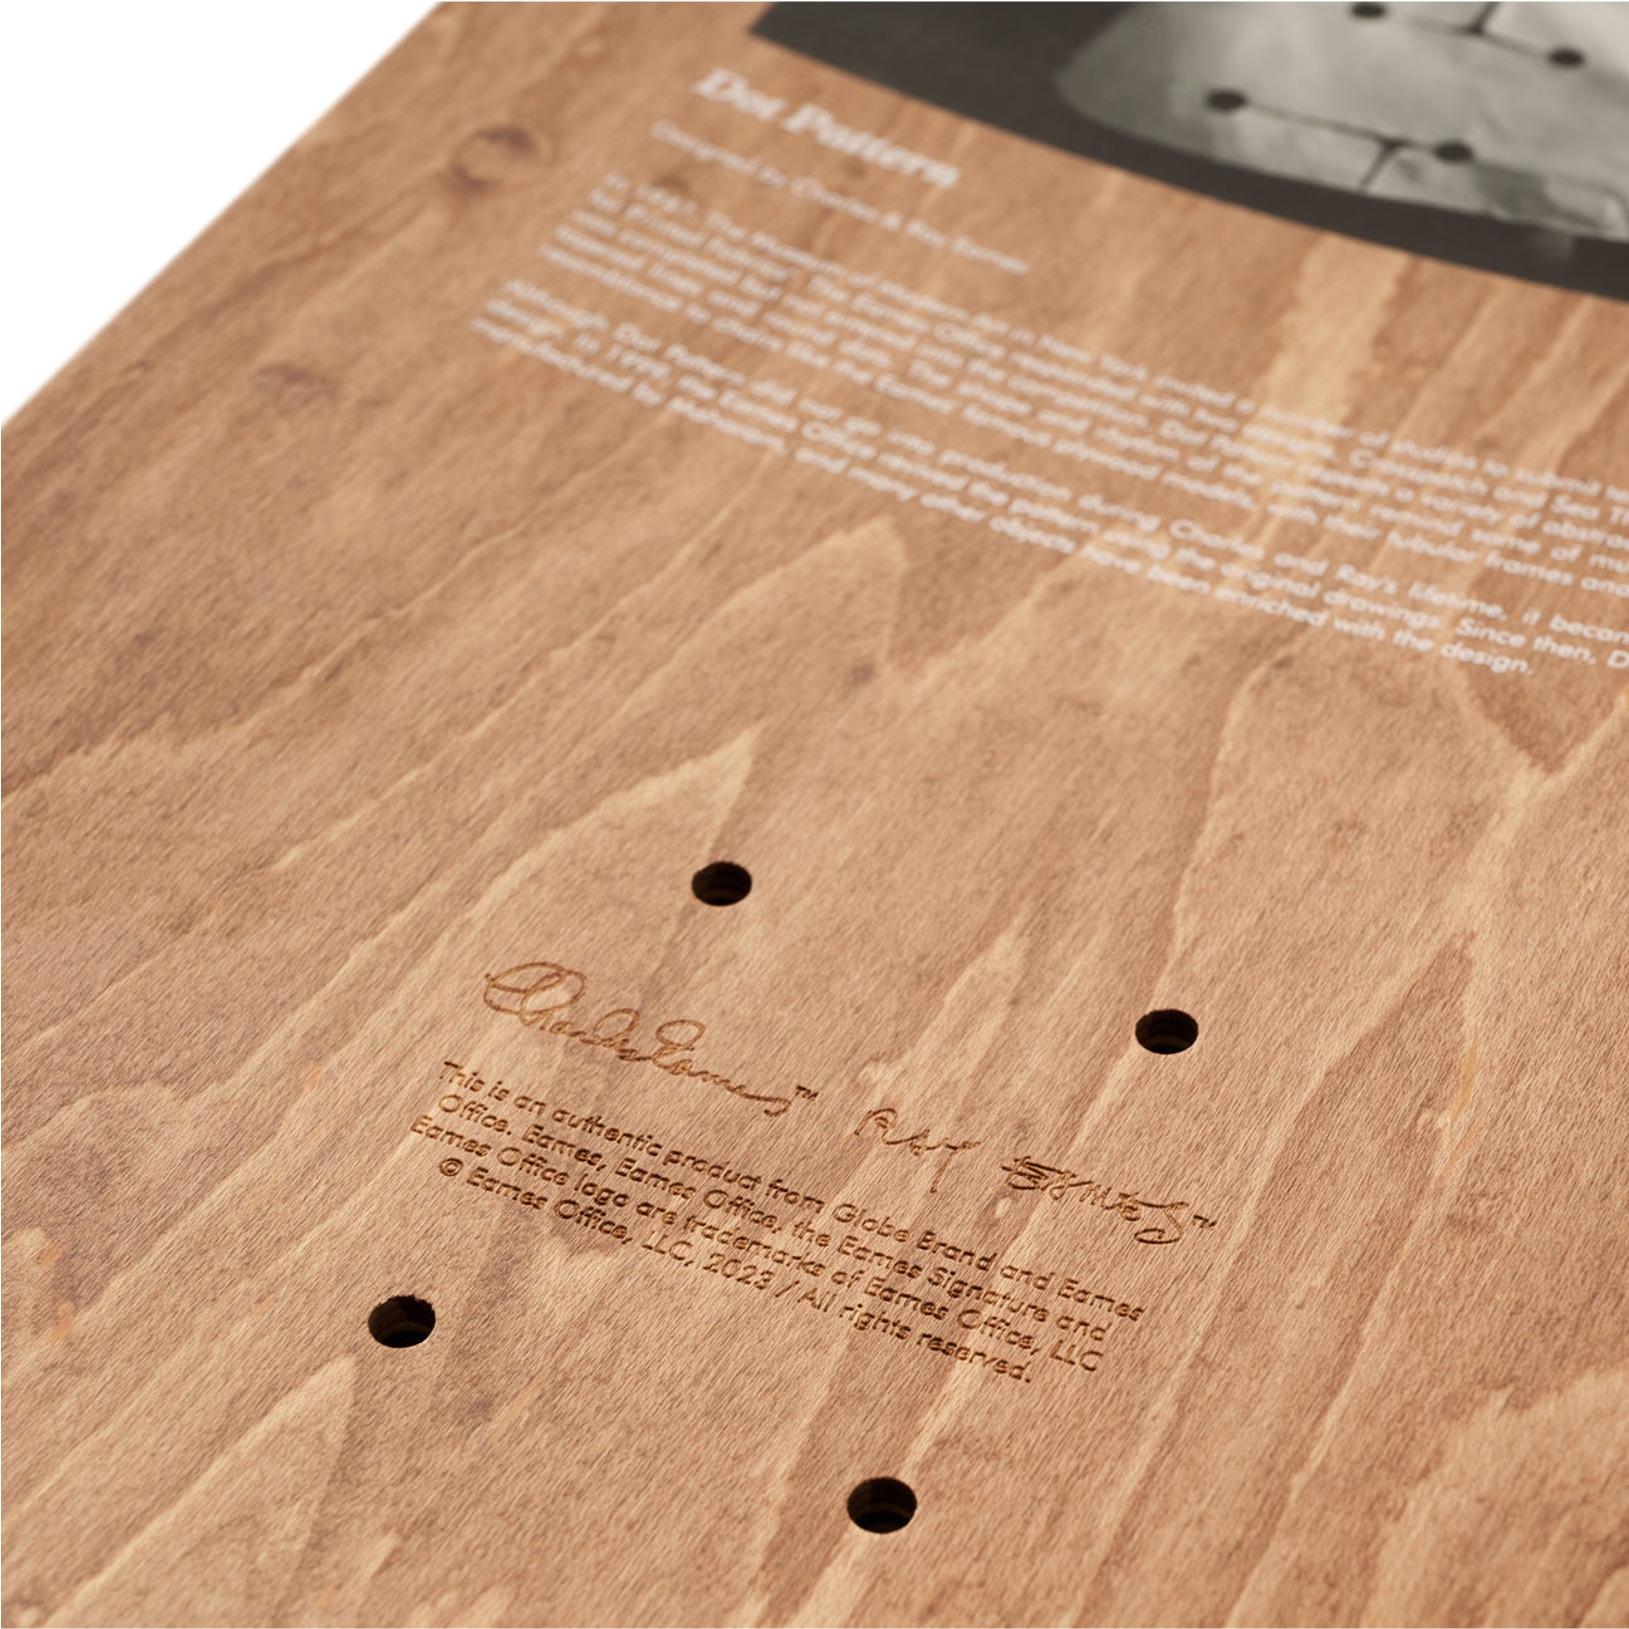 Charles and Ray Eames
Dot Pattern Skateboard Deck, 2023
Maple wood. Raised-ink print of Dot Pattern on bottom with a dark maple veneer and archival print on top.
31 1/2 × 7 9/10 in  80 × 20 cm